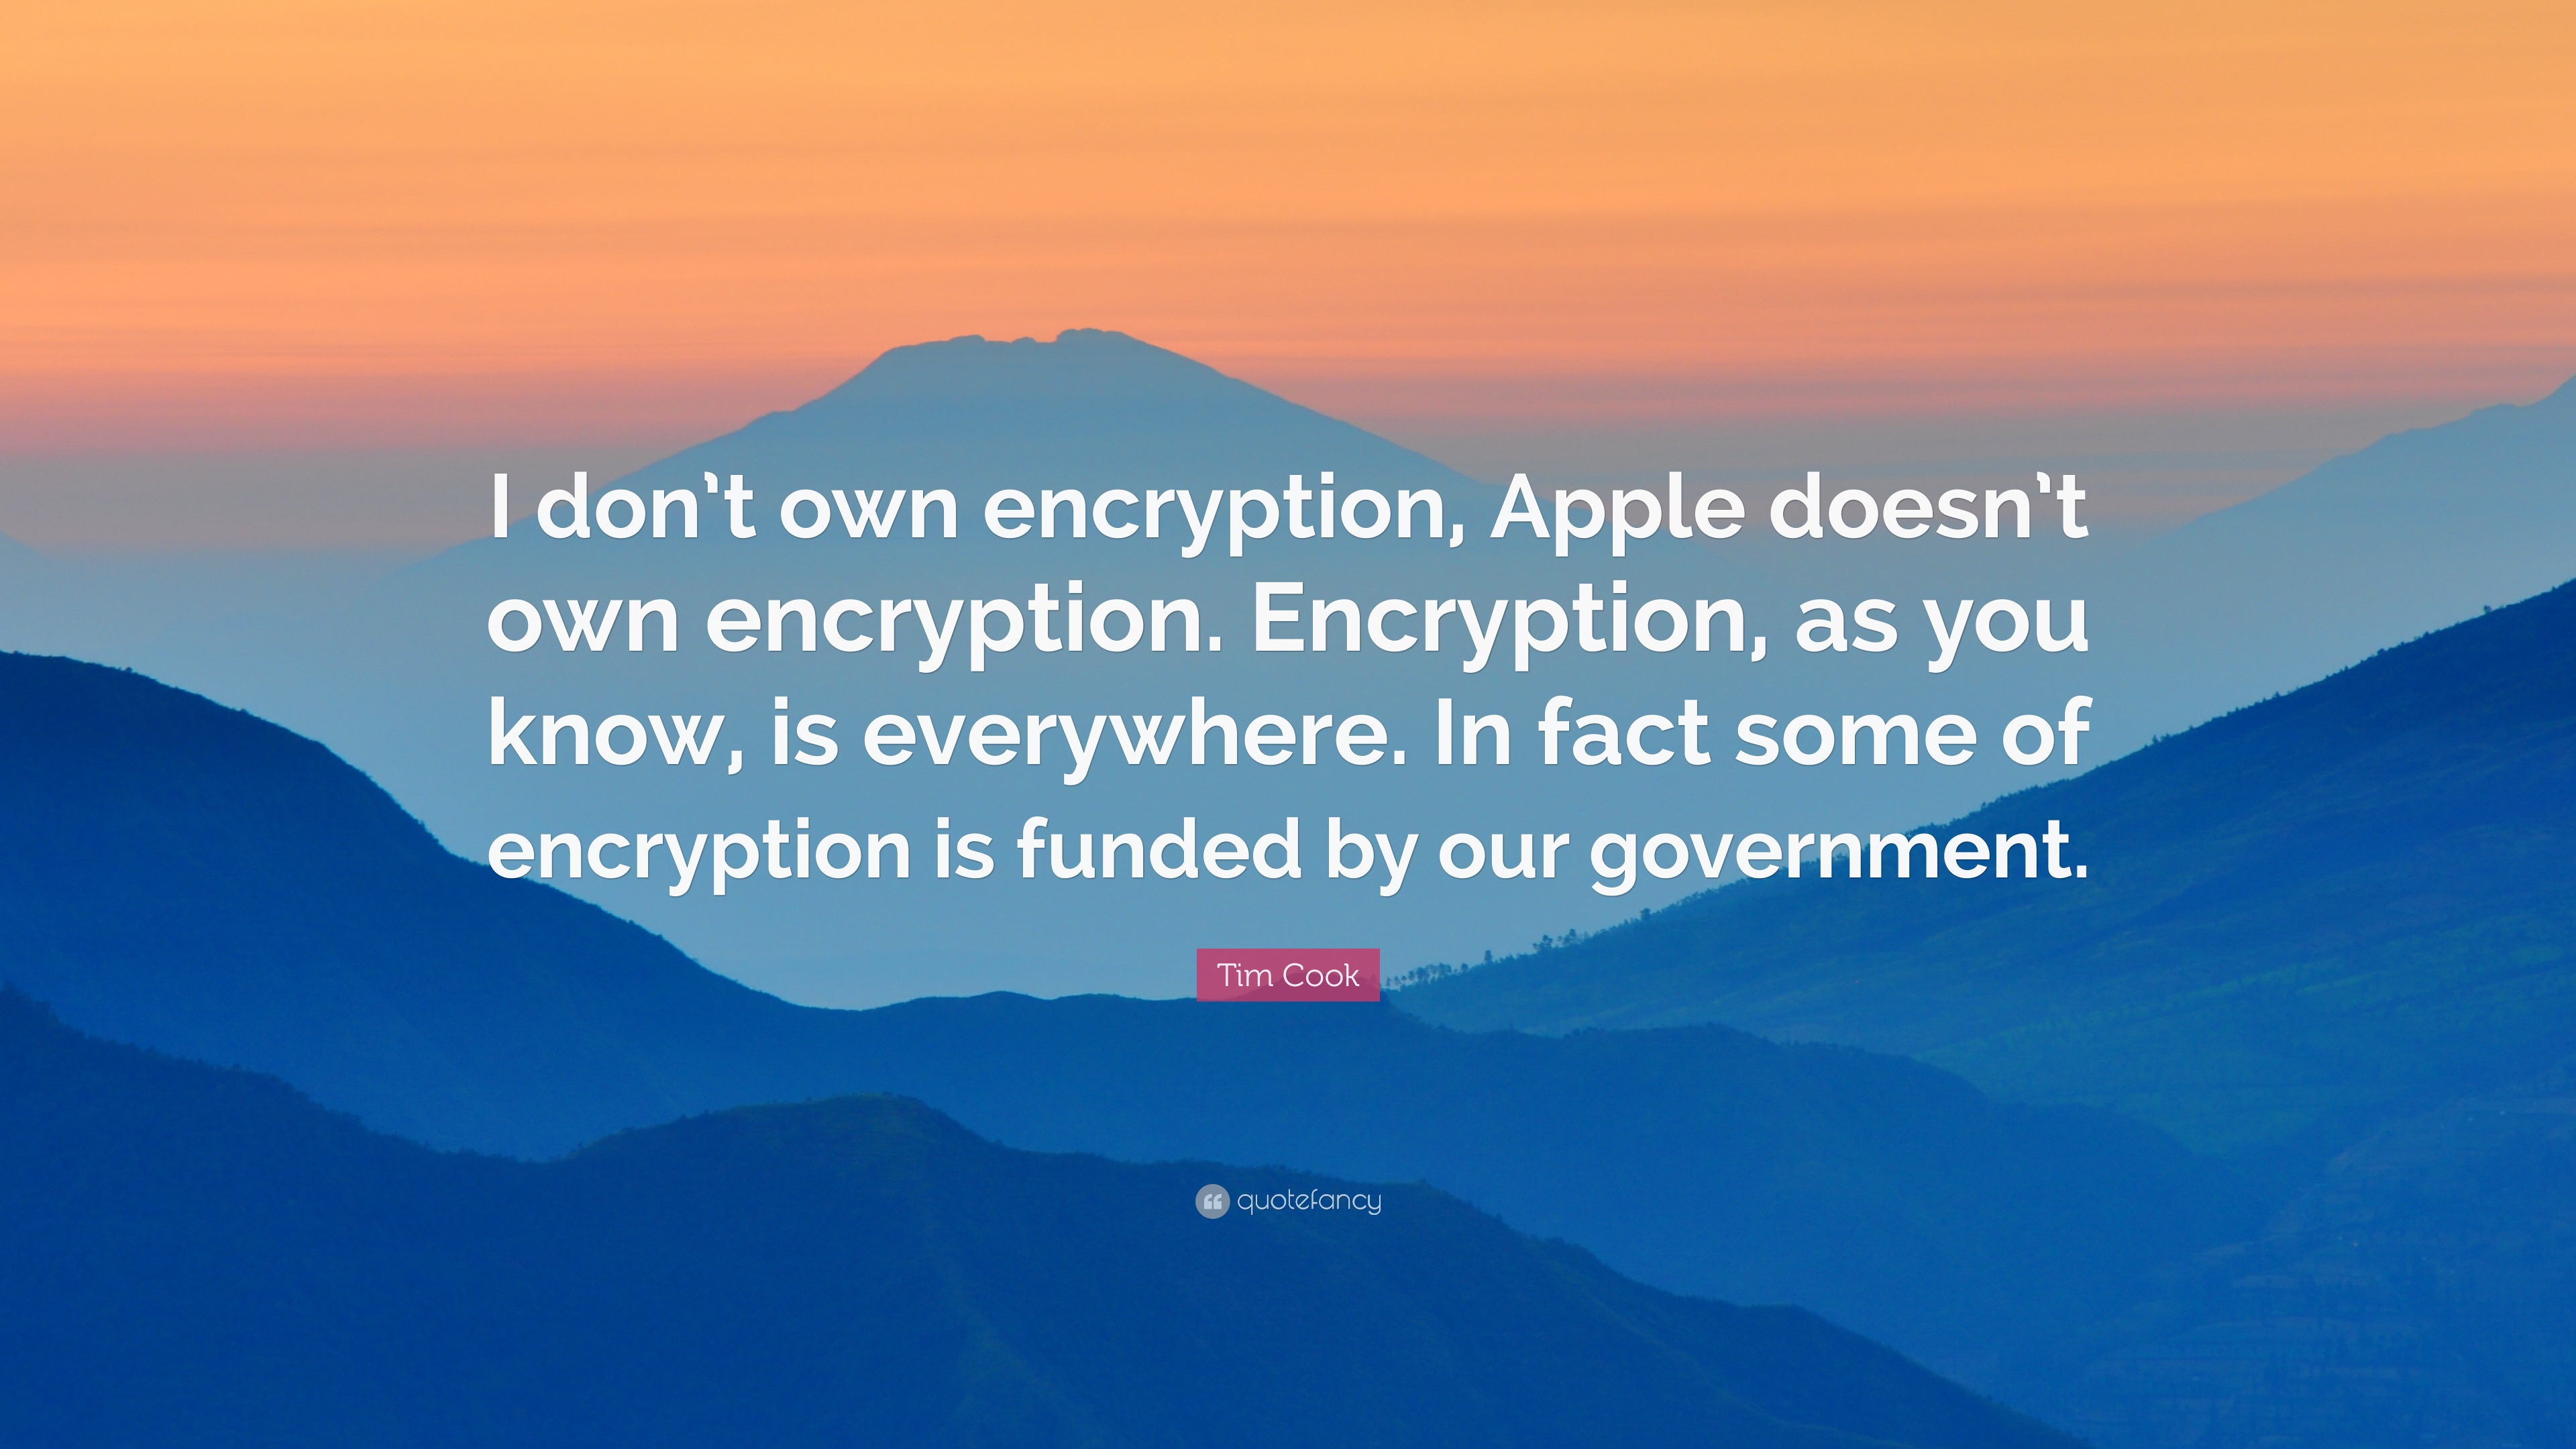 Tim Cook Quote: “I don't own encryption, Apple doesn't own